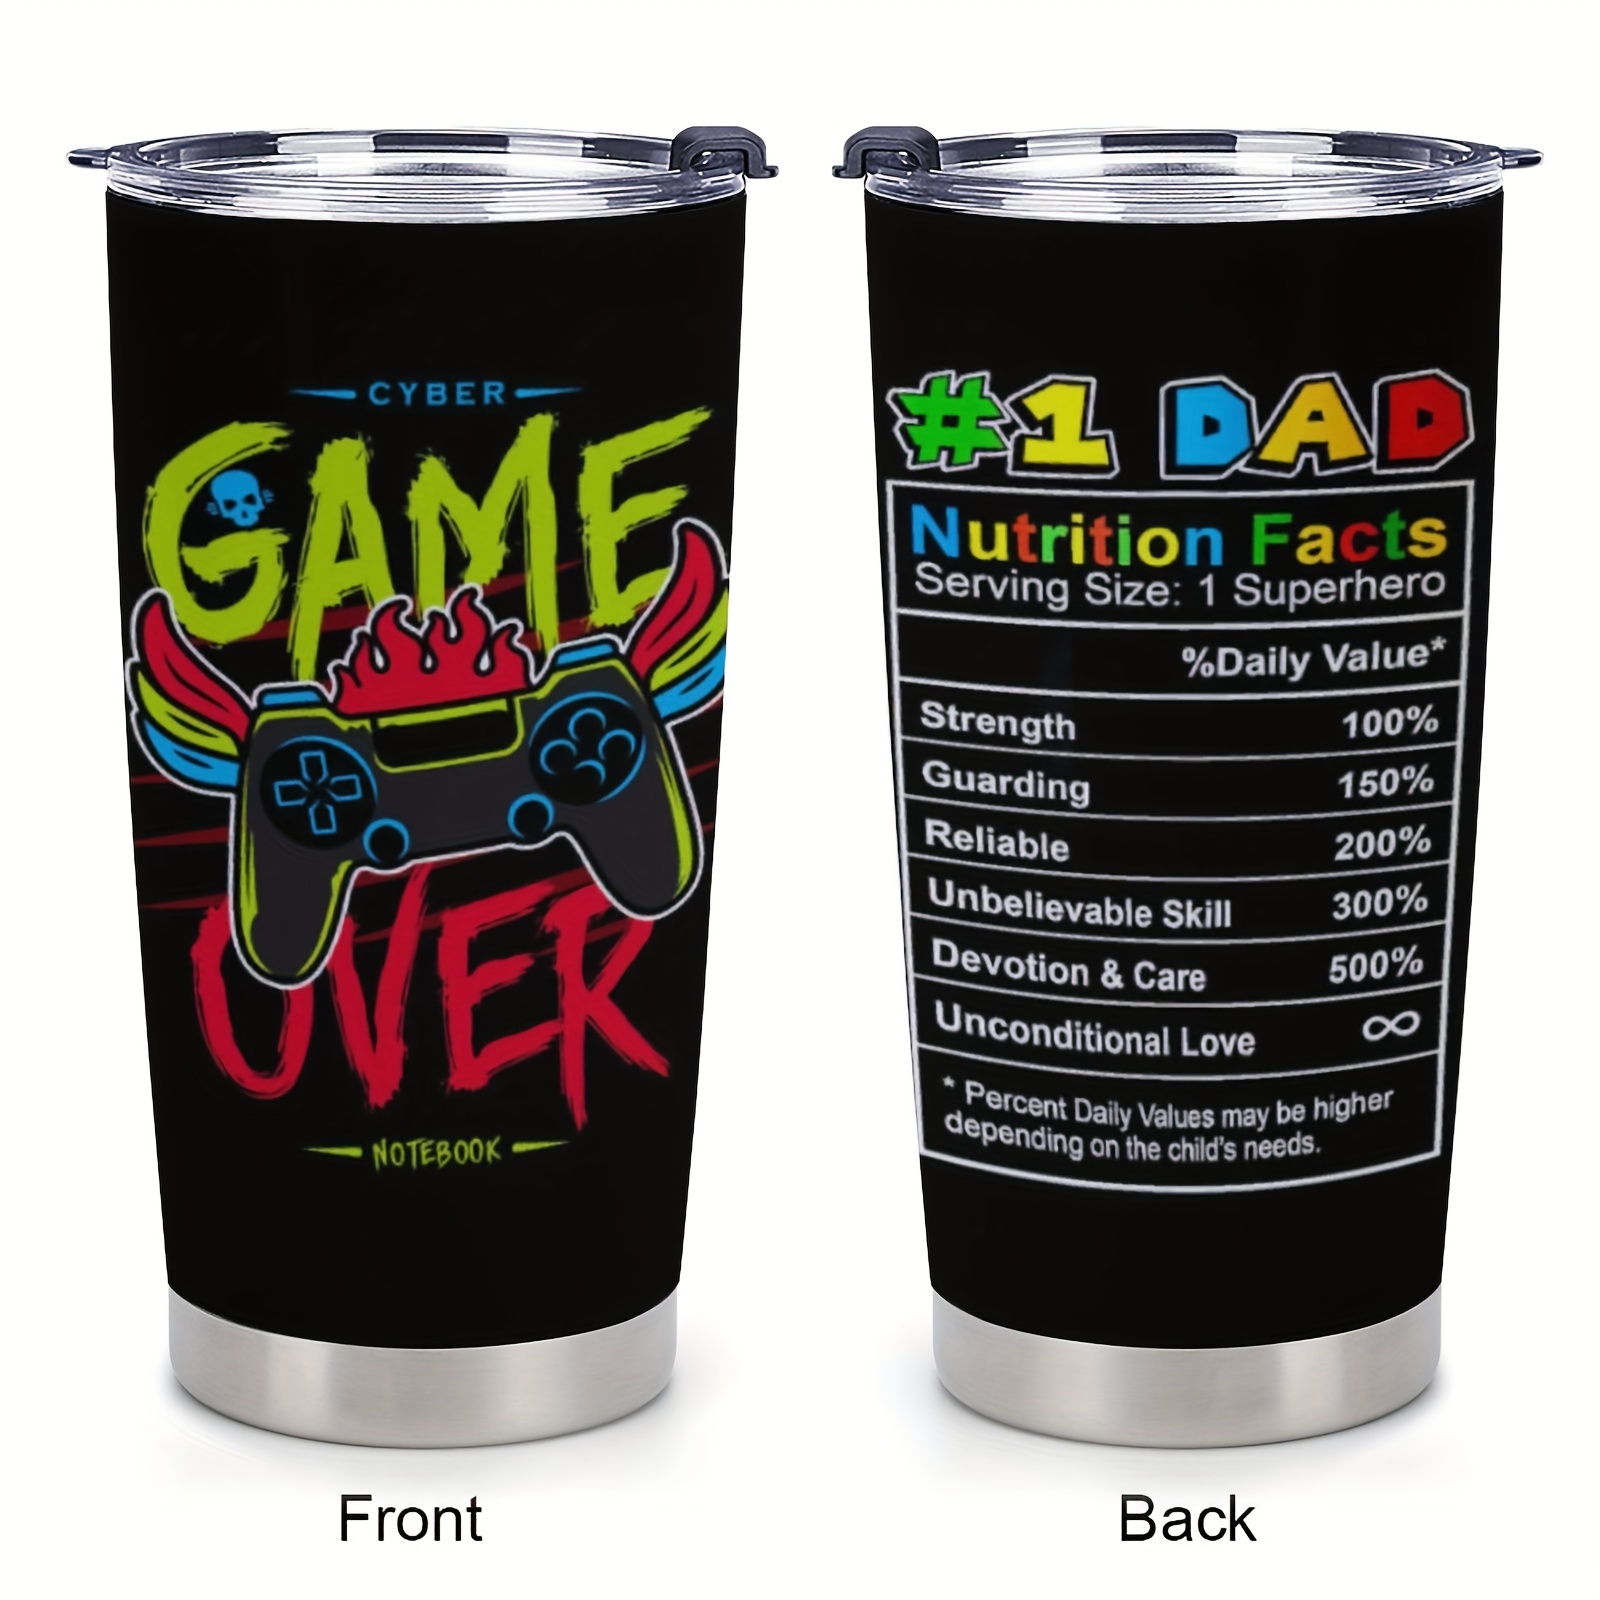 

1pc 20oz Stainless Steel Cup With Lid, Gifts For Dad, Game Dad Coffee Mug, Dad Nutrition Facts, Funny Dad Birthday Gifts